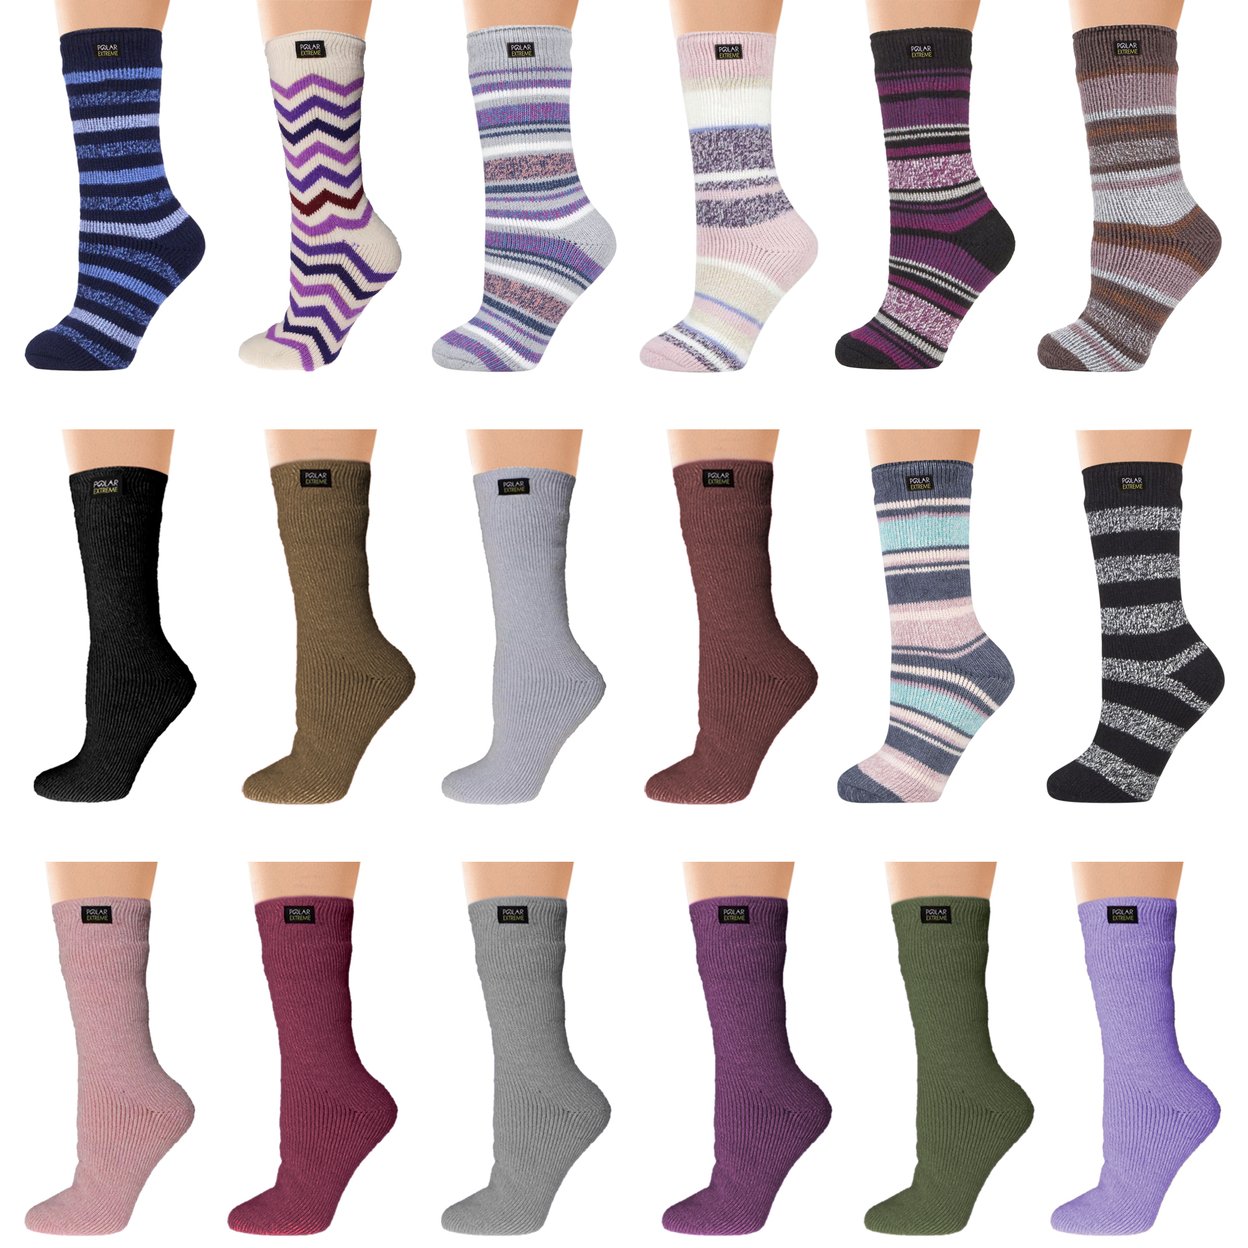 3-Pairs: Women's Polar Extreme Insulated Thermal Ultra-Soft Winter Warm Crew Socks